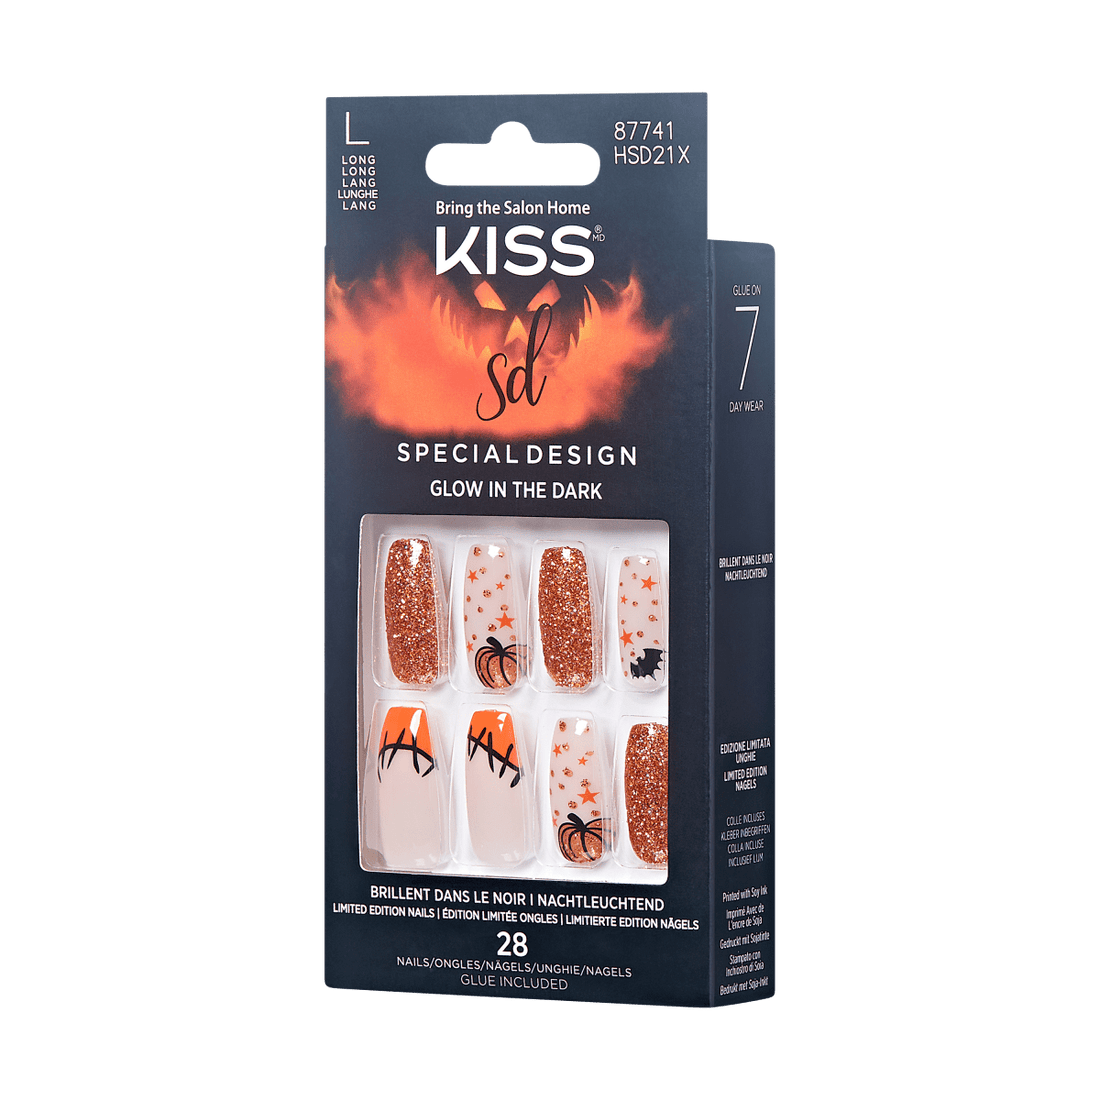 KISS Halloween Special Design Nails - Wicked